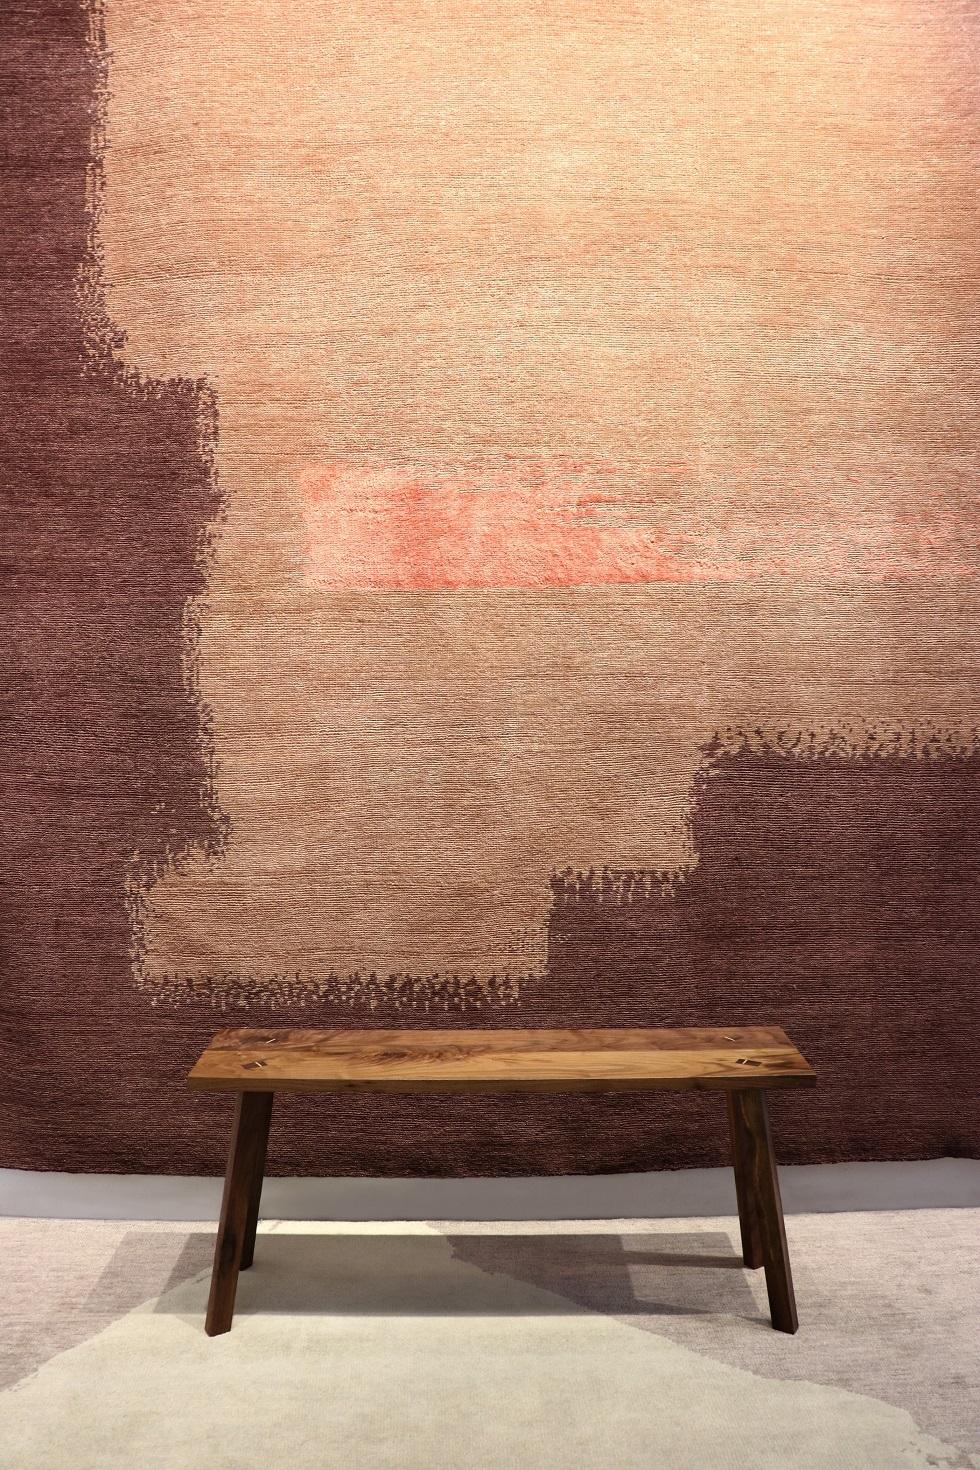 Contemporary Design Rug Burgundy Peach and Coral Hand-Knotted Wool in Stock 3